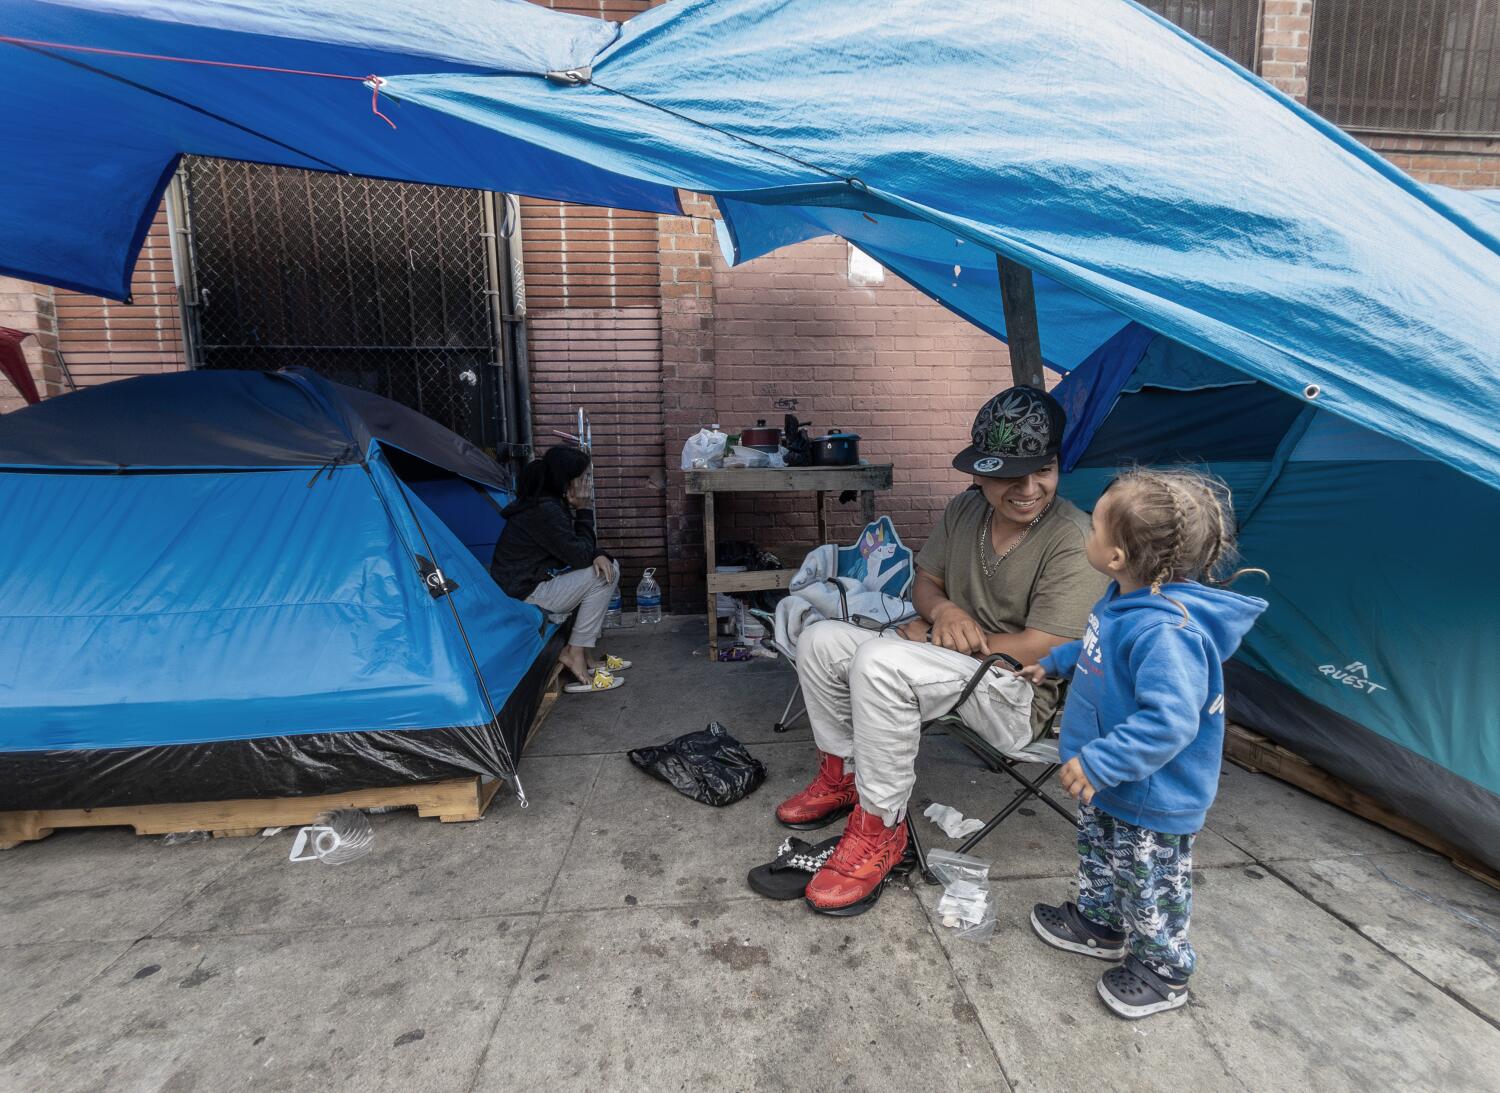 Image for display with article titled More Migrant Families With Children Sleeping in Tents on Skid Row Test Official Response